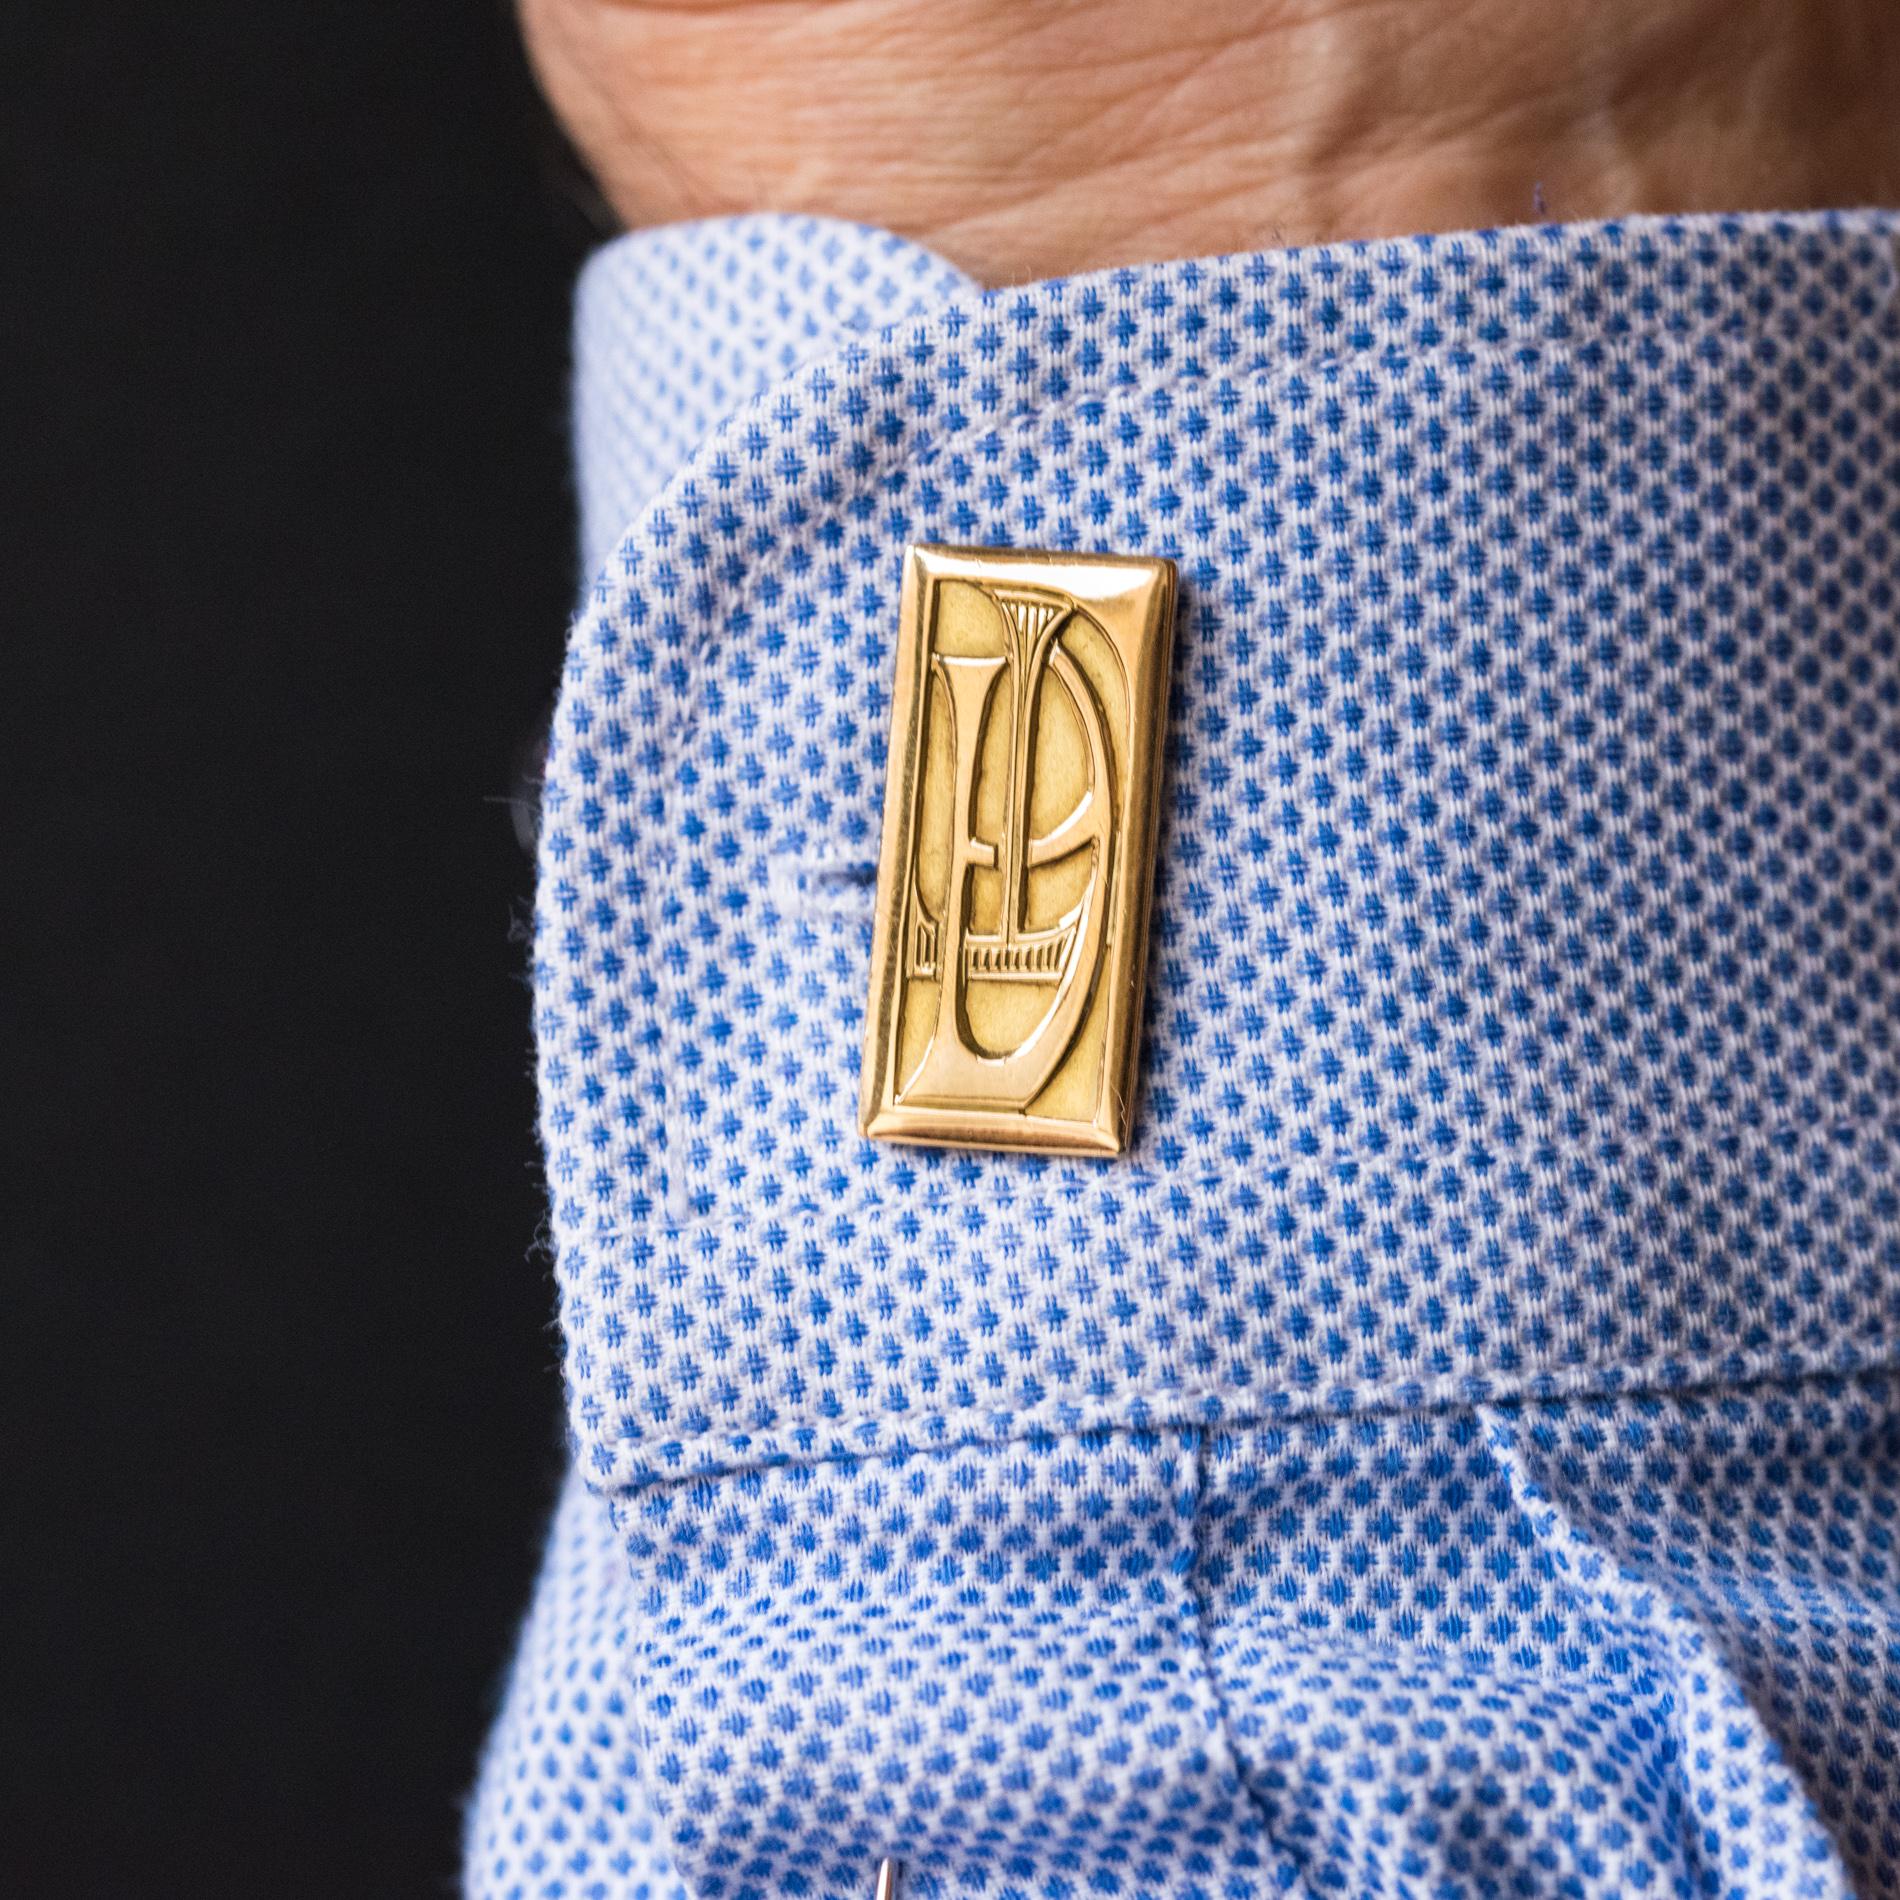 Pair of cufflinks in 18 karat yellow gold, eagle's head hallmark.
Rectangular in shape, each of these antique cufflinks is decorated with applique of the initials AT. The clip is a truncated shuttle connected to the button by a chain.
Height: 25 mm,